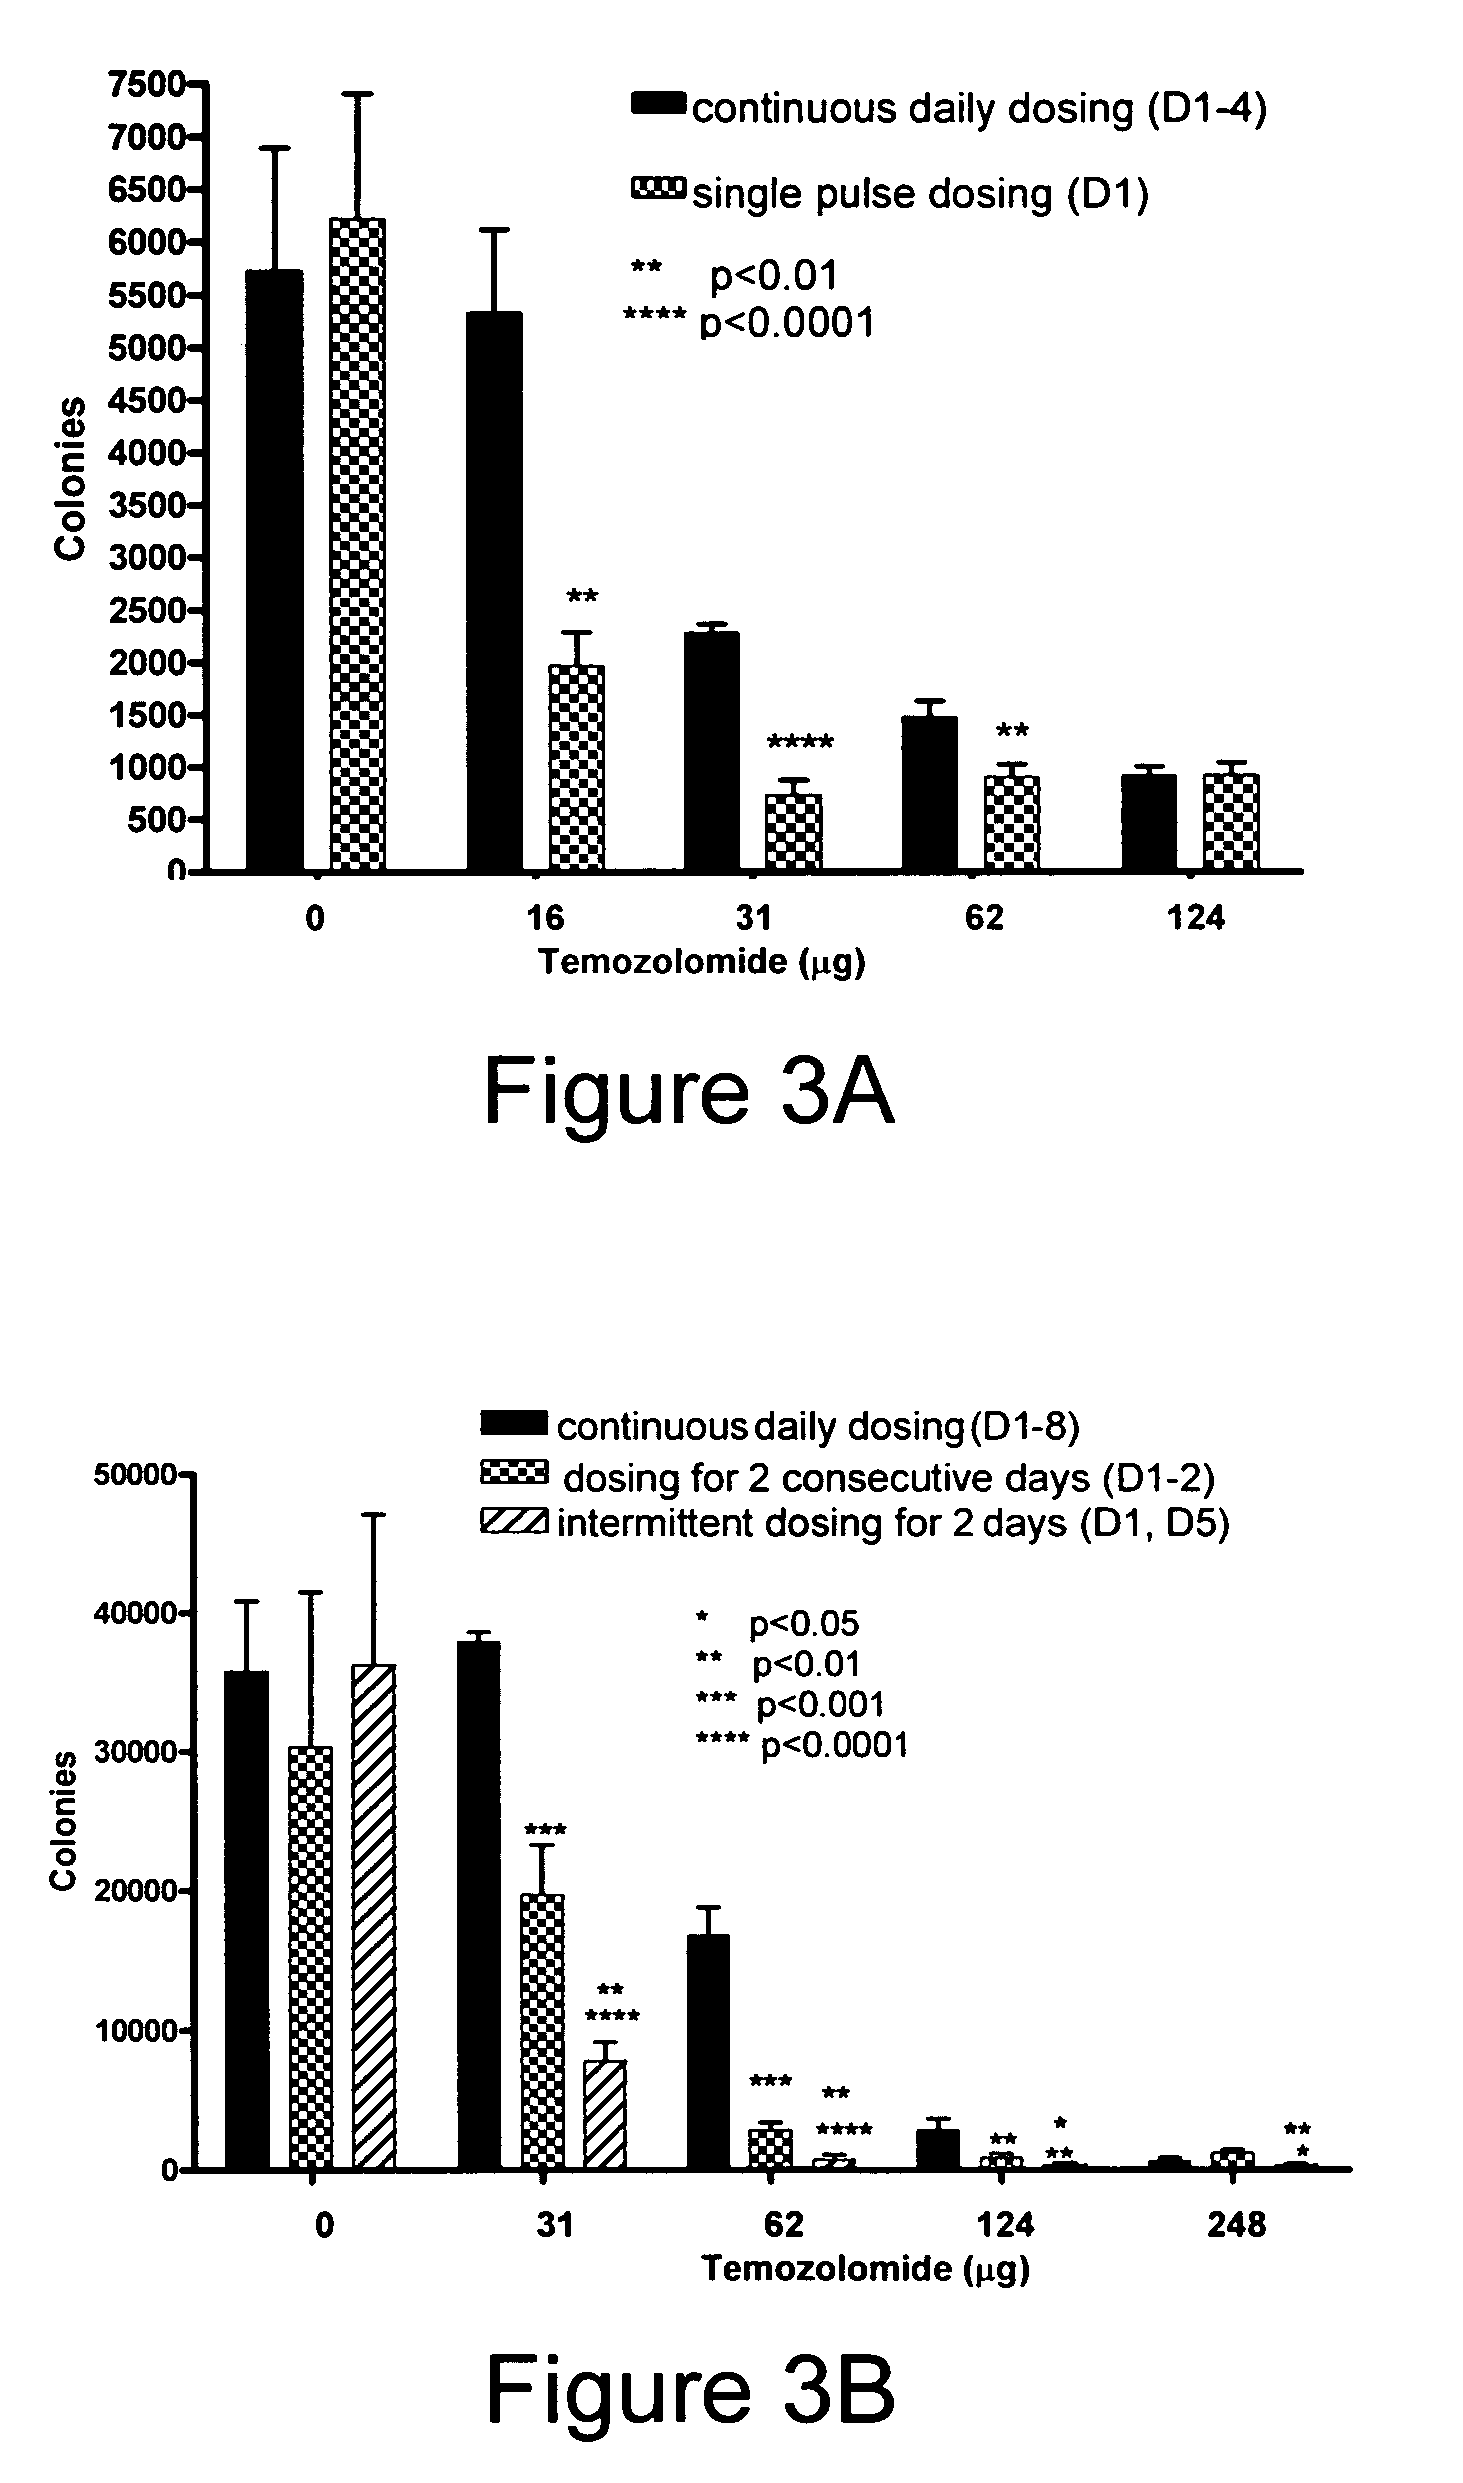 Methods of treating cell proliferative disorders using a compressed temozolomide dosing schedule